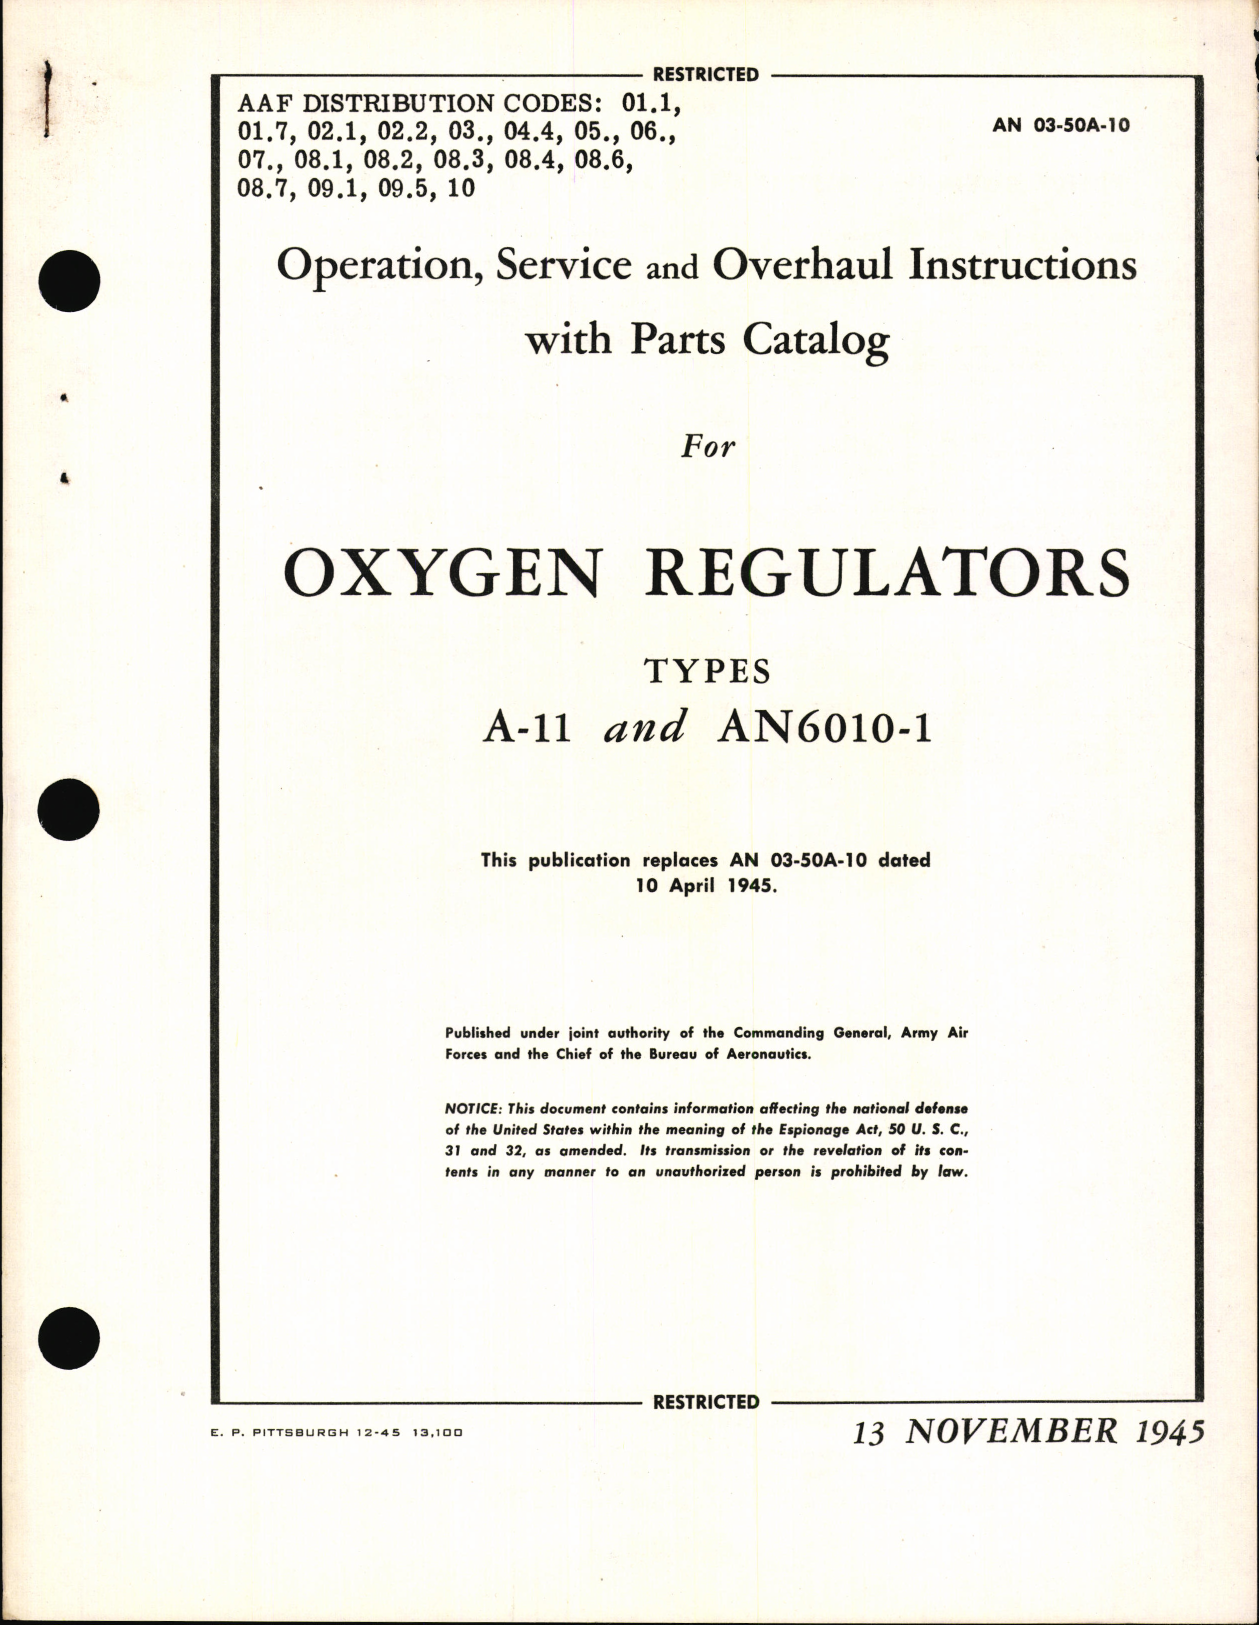 Sample page 7 from AirCorps Library document: Handbook of Operation, Service, and Overhaul Instructions with Parts Catalog for Oxygen Regulators